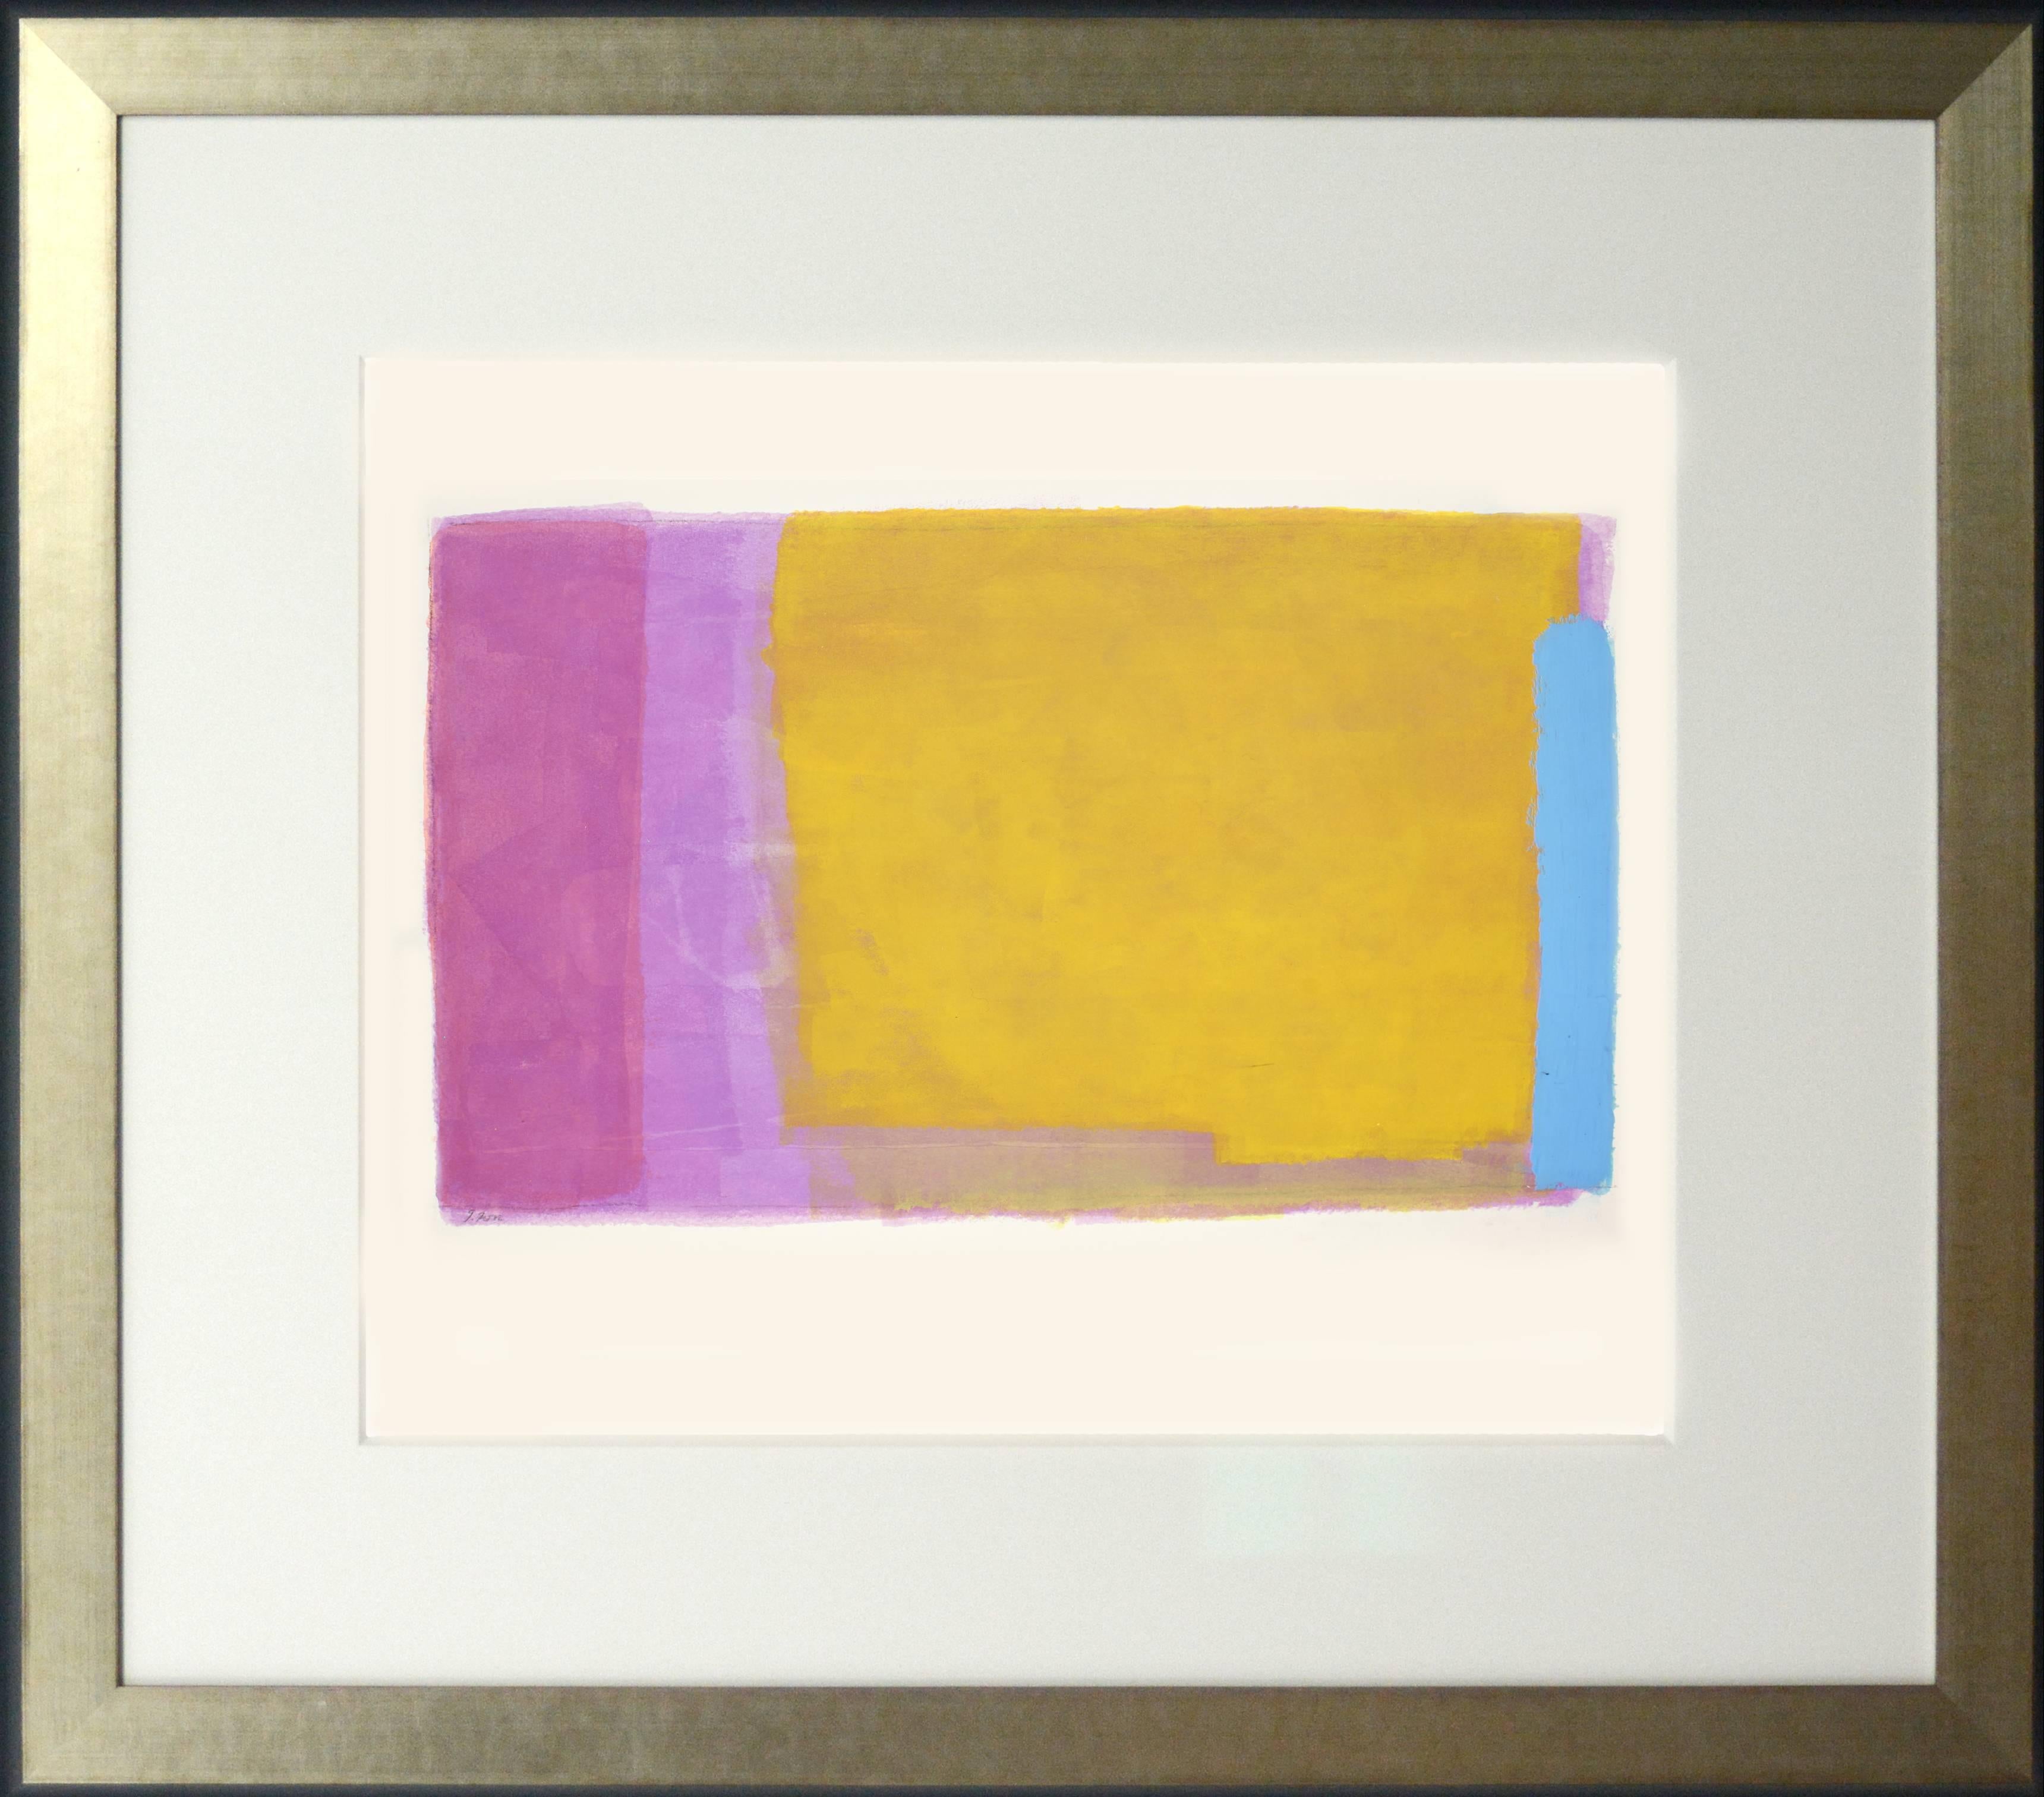 Layered gouache veils of brilliant pink, mauve, overlaid with a dominate swath of Tuscan yellow contained by a vertical tache of dense sky blue. This piece is representative of the important mid-career shift Fox made into non-figurative painting.